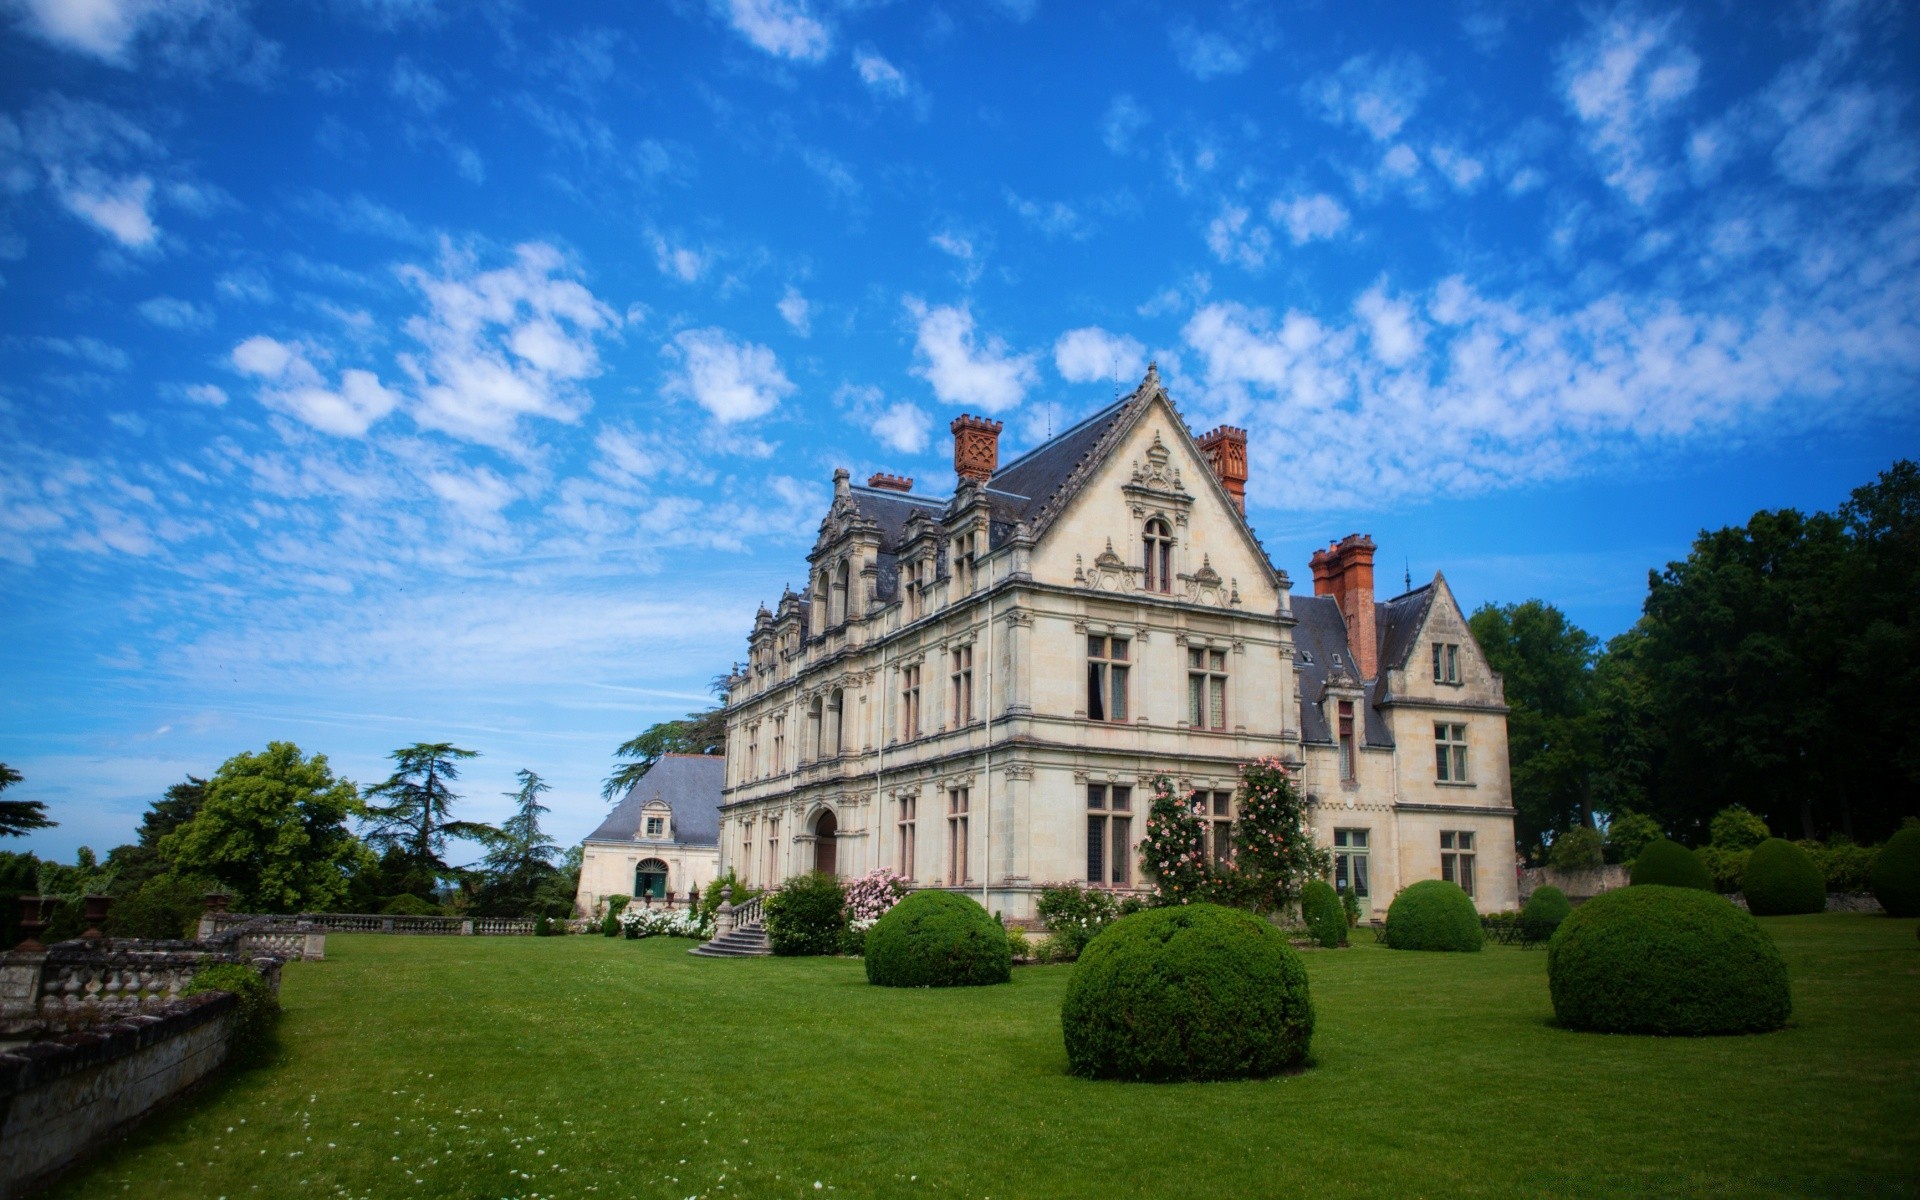 europe architecture building outdoors lawn home house sky travel mansion castle grass